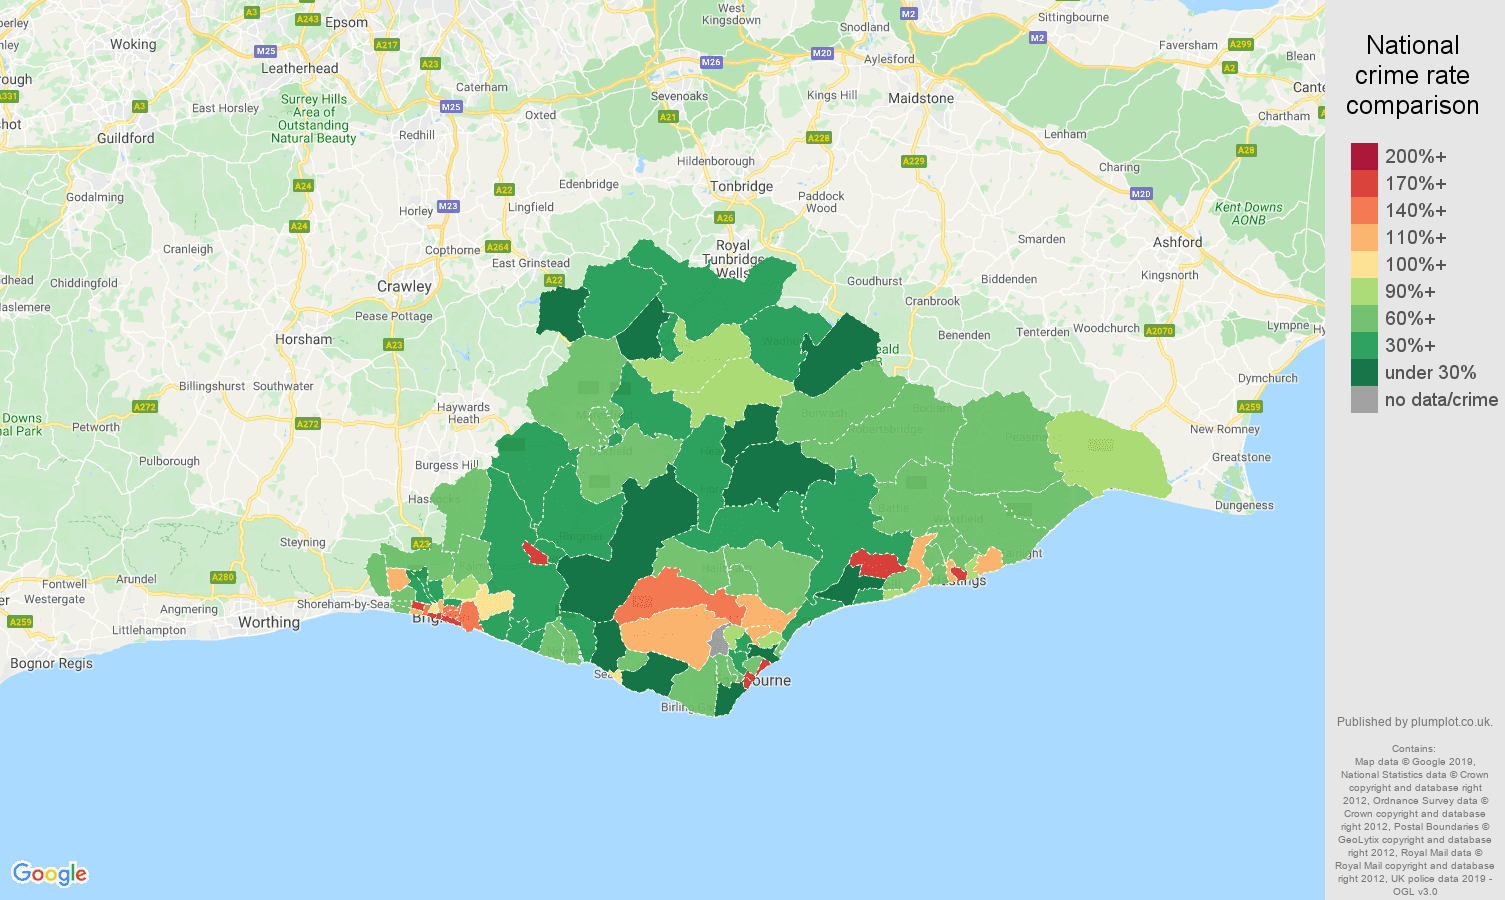 East Sussex other crime rate comparison map